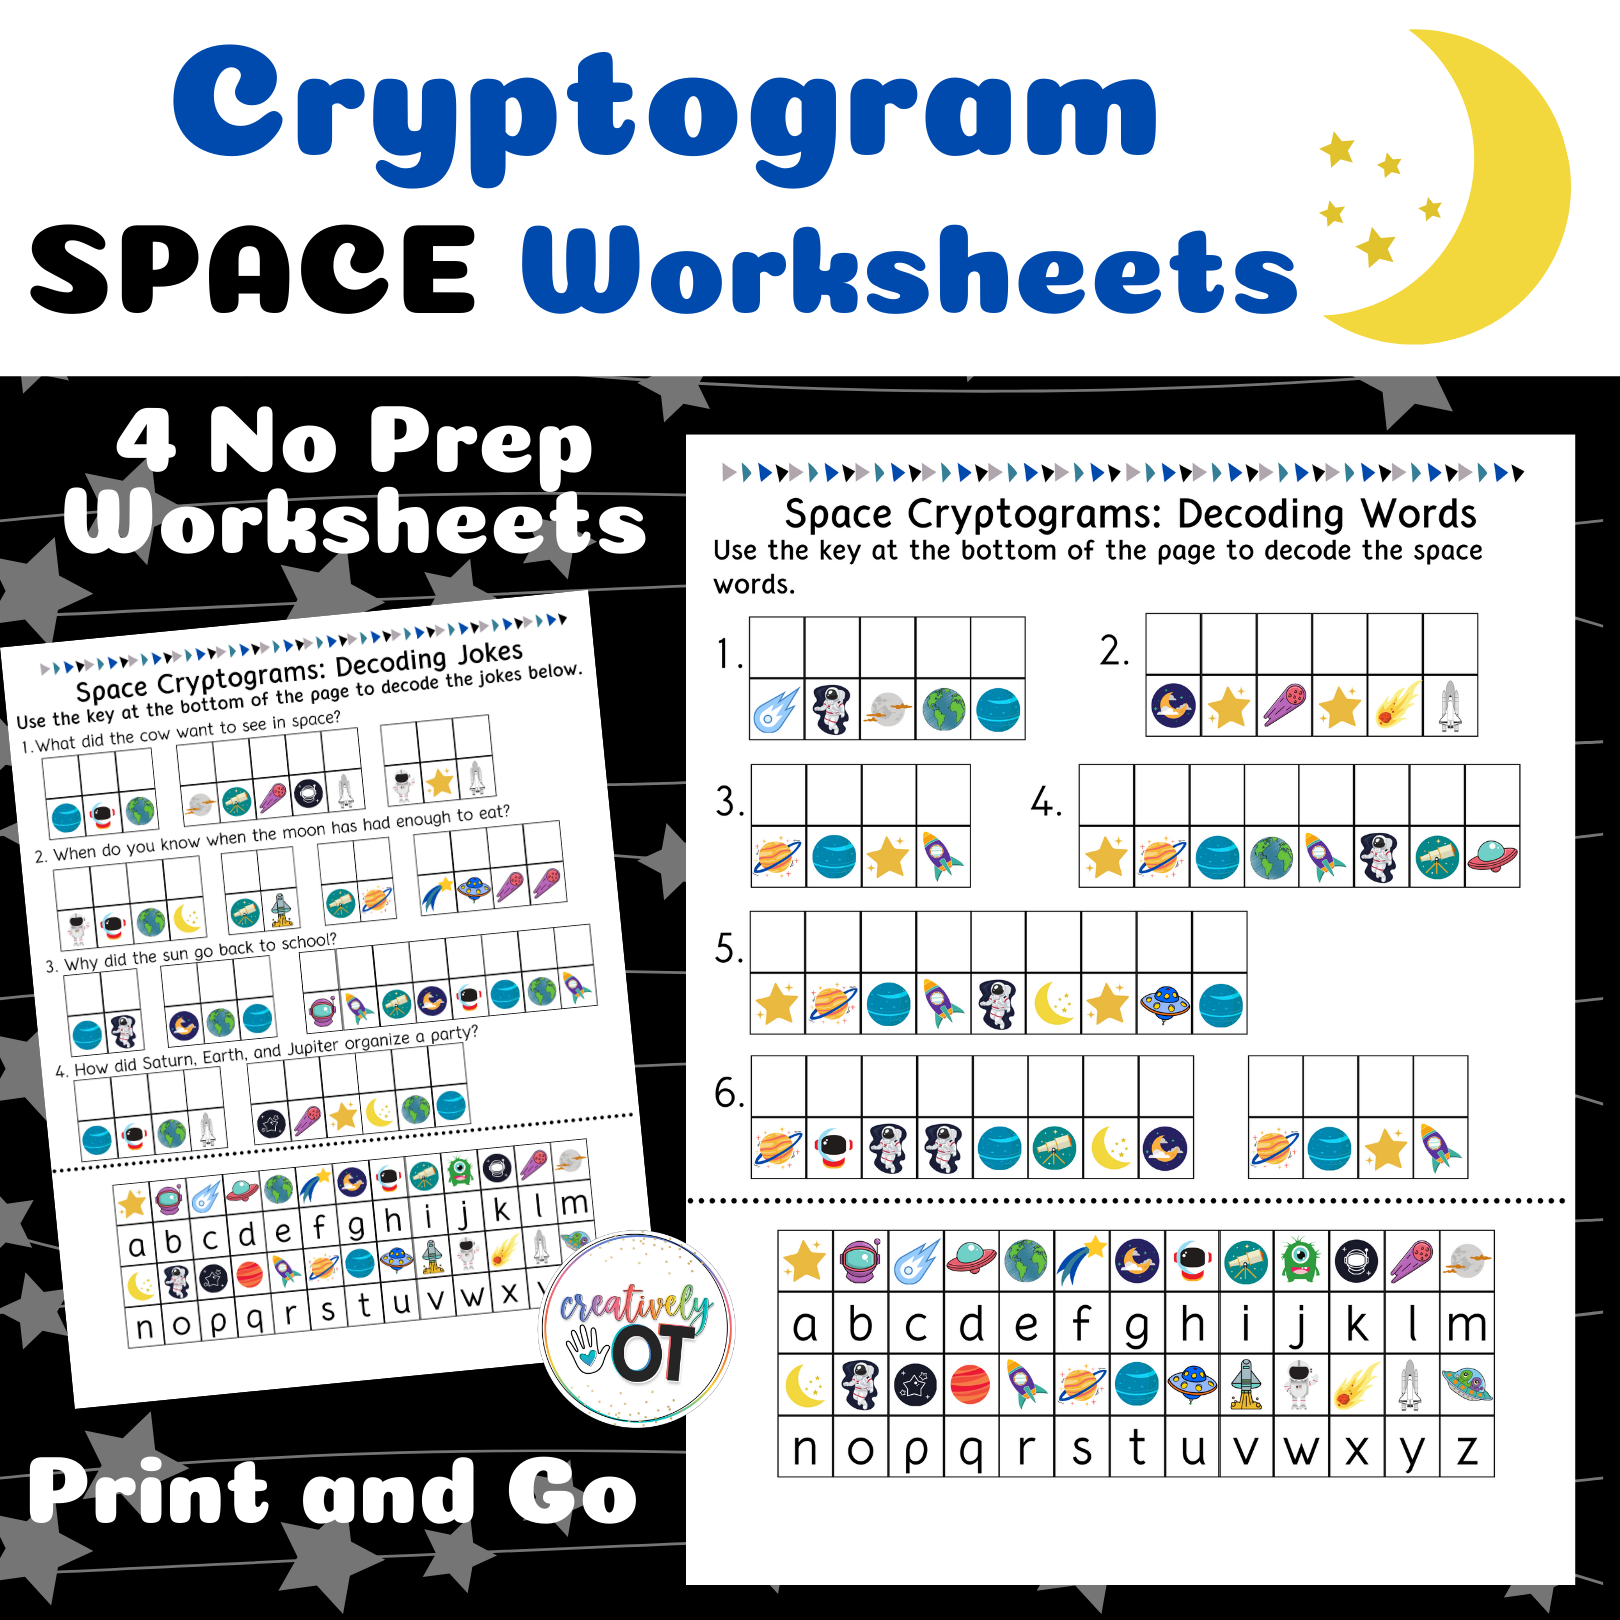 Space Cryptogram and Decoding Worksheets